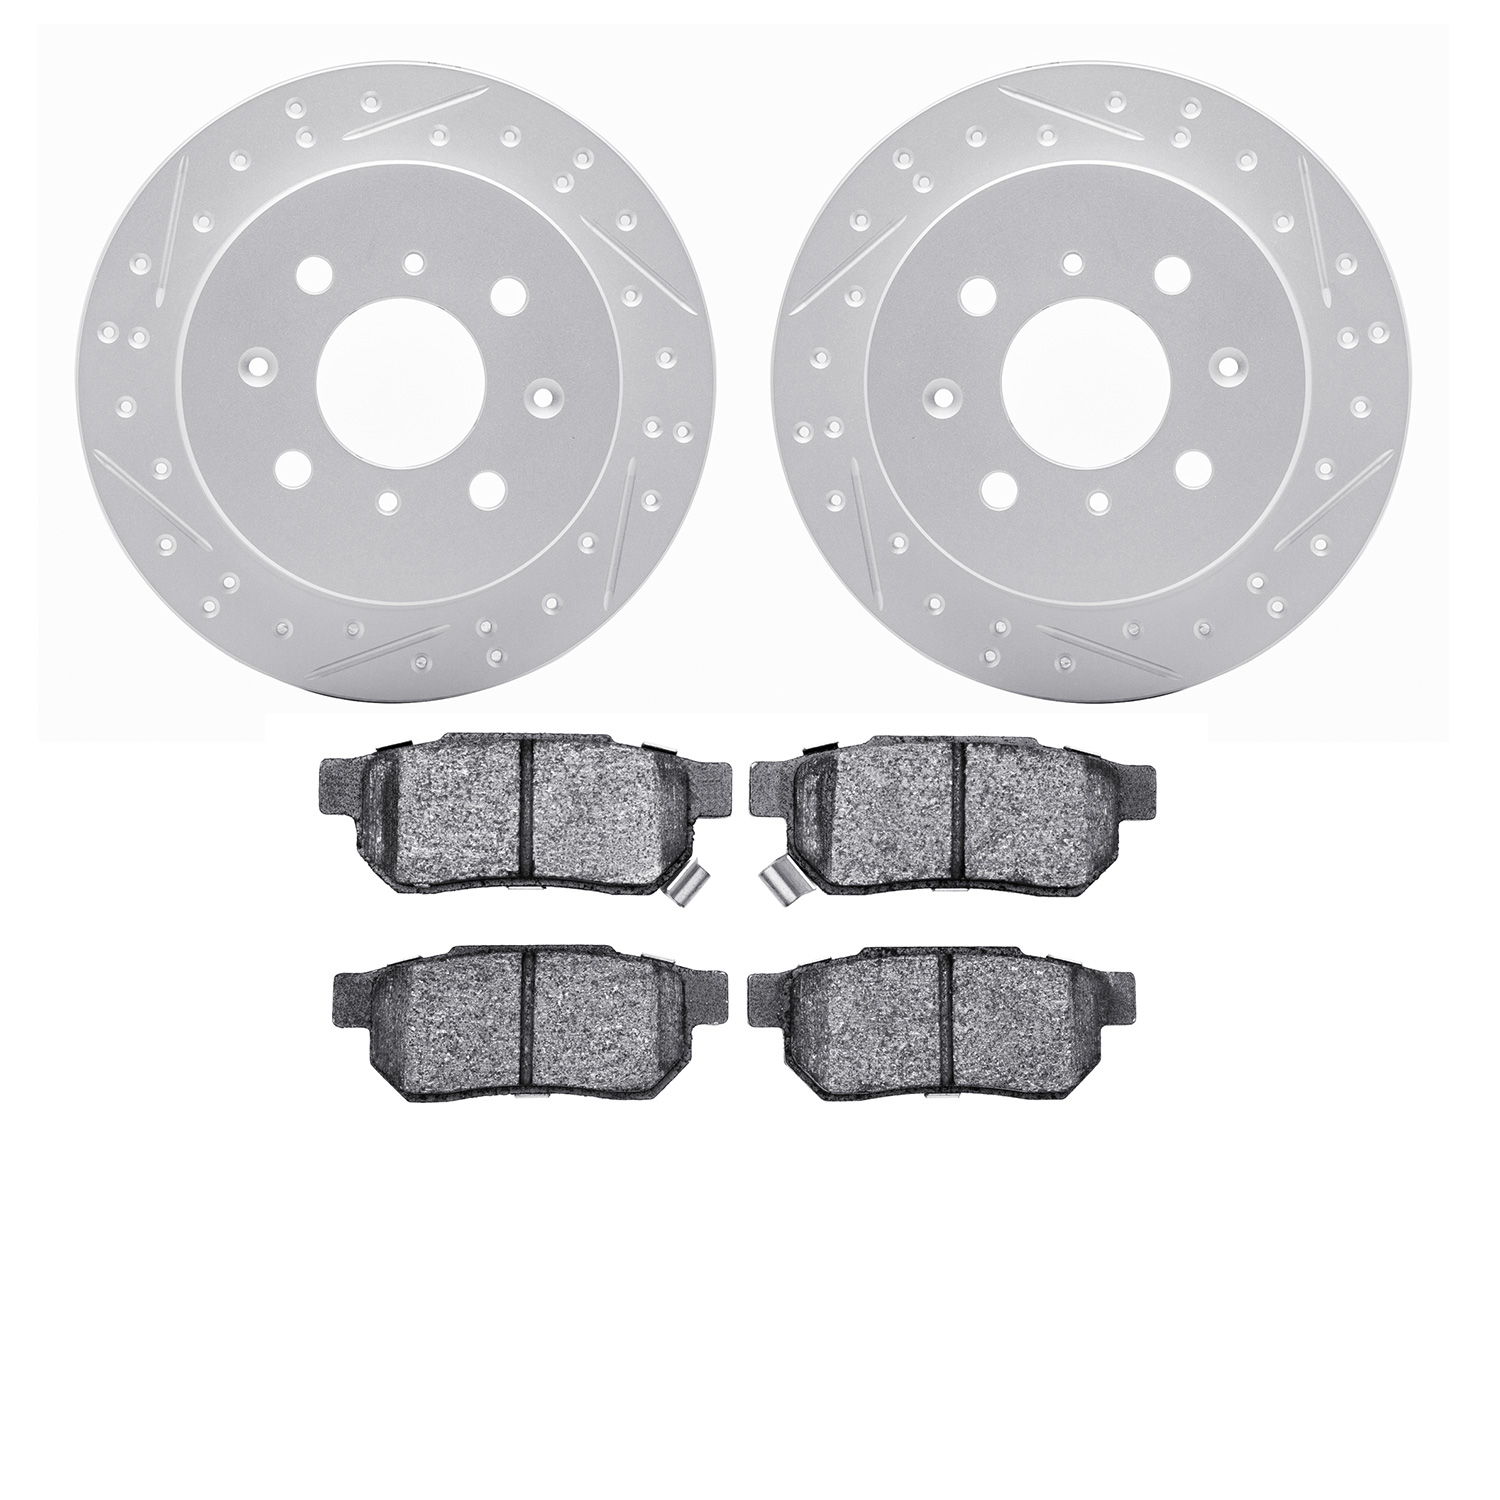 2502-59005 Geoperformance Drilled/Slotted Rotors w/5000 Advanced Brake Pads Kit, 1988-2001 Acura/Honda, Position: Rear